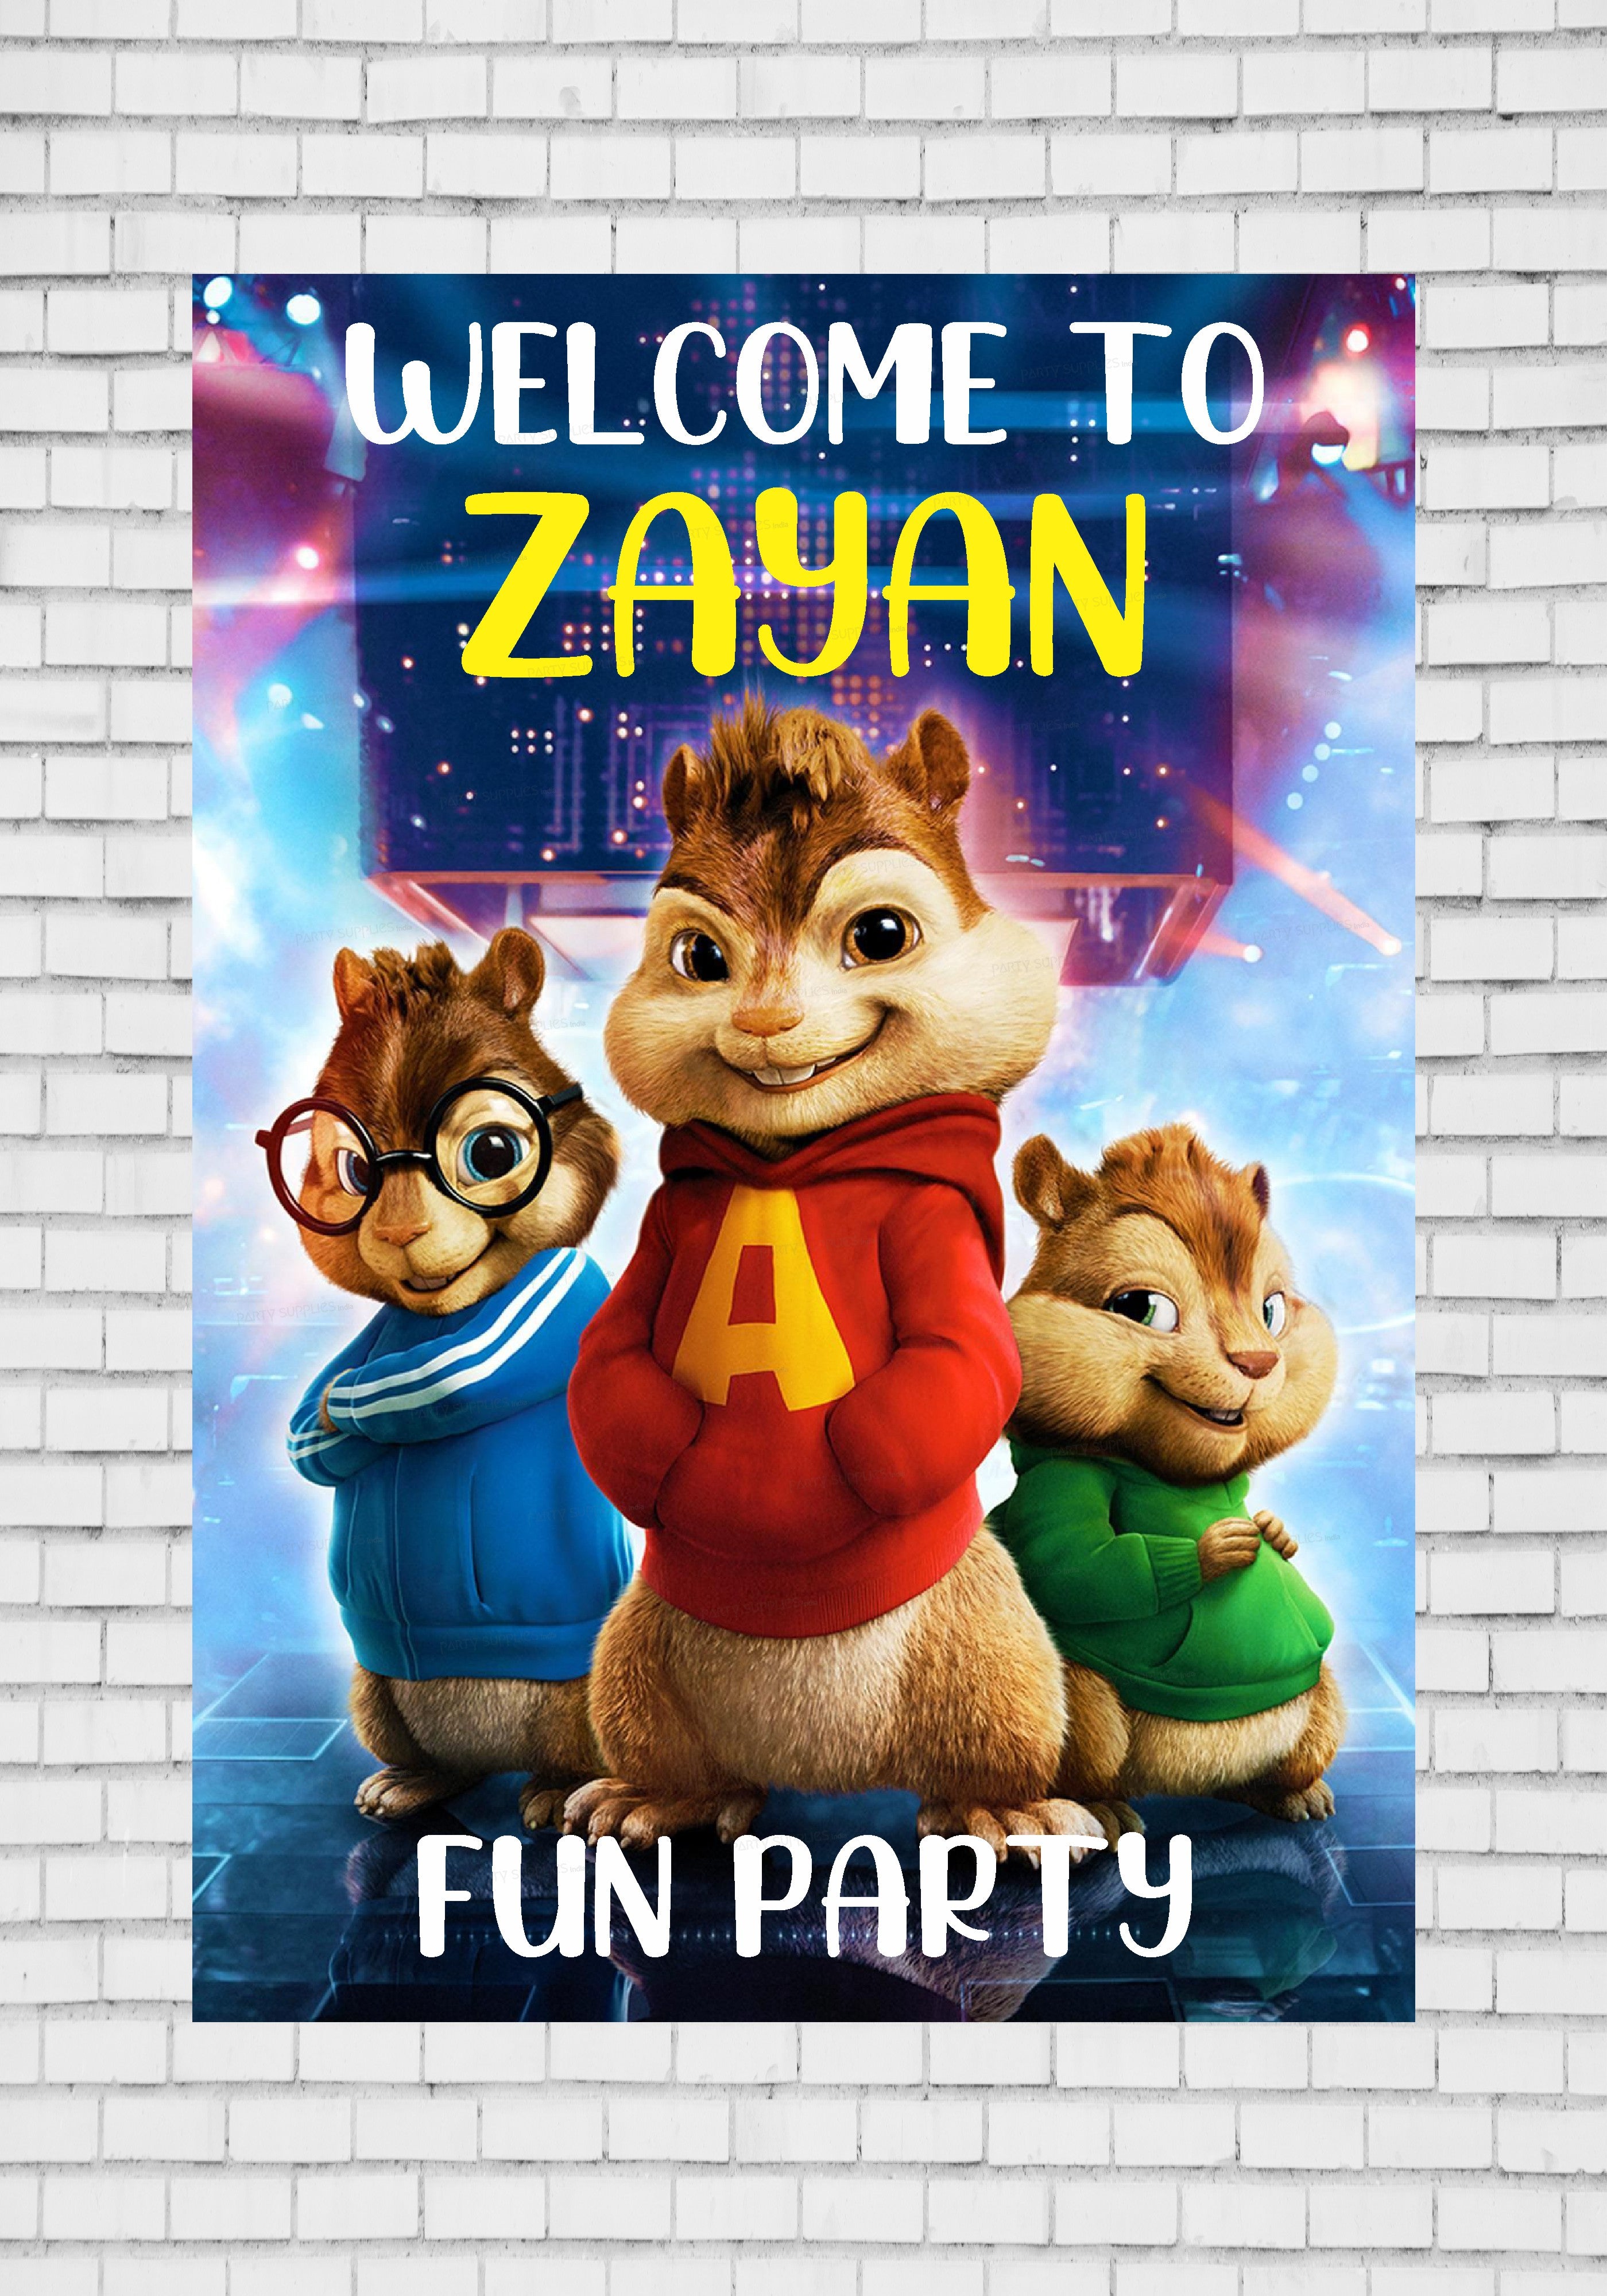 PSI Alvin and Chipmunks Theme Welcome Board